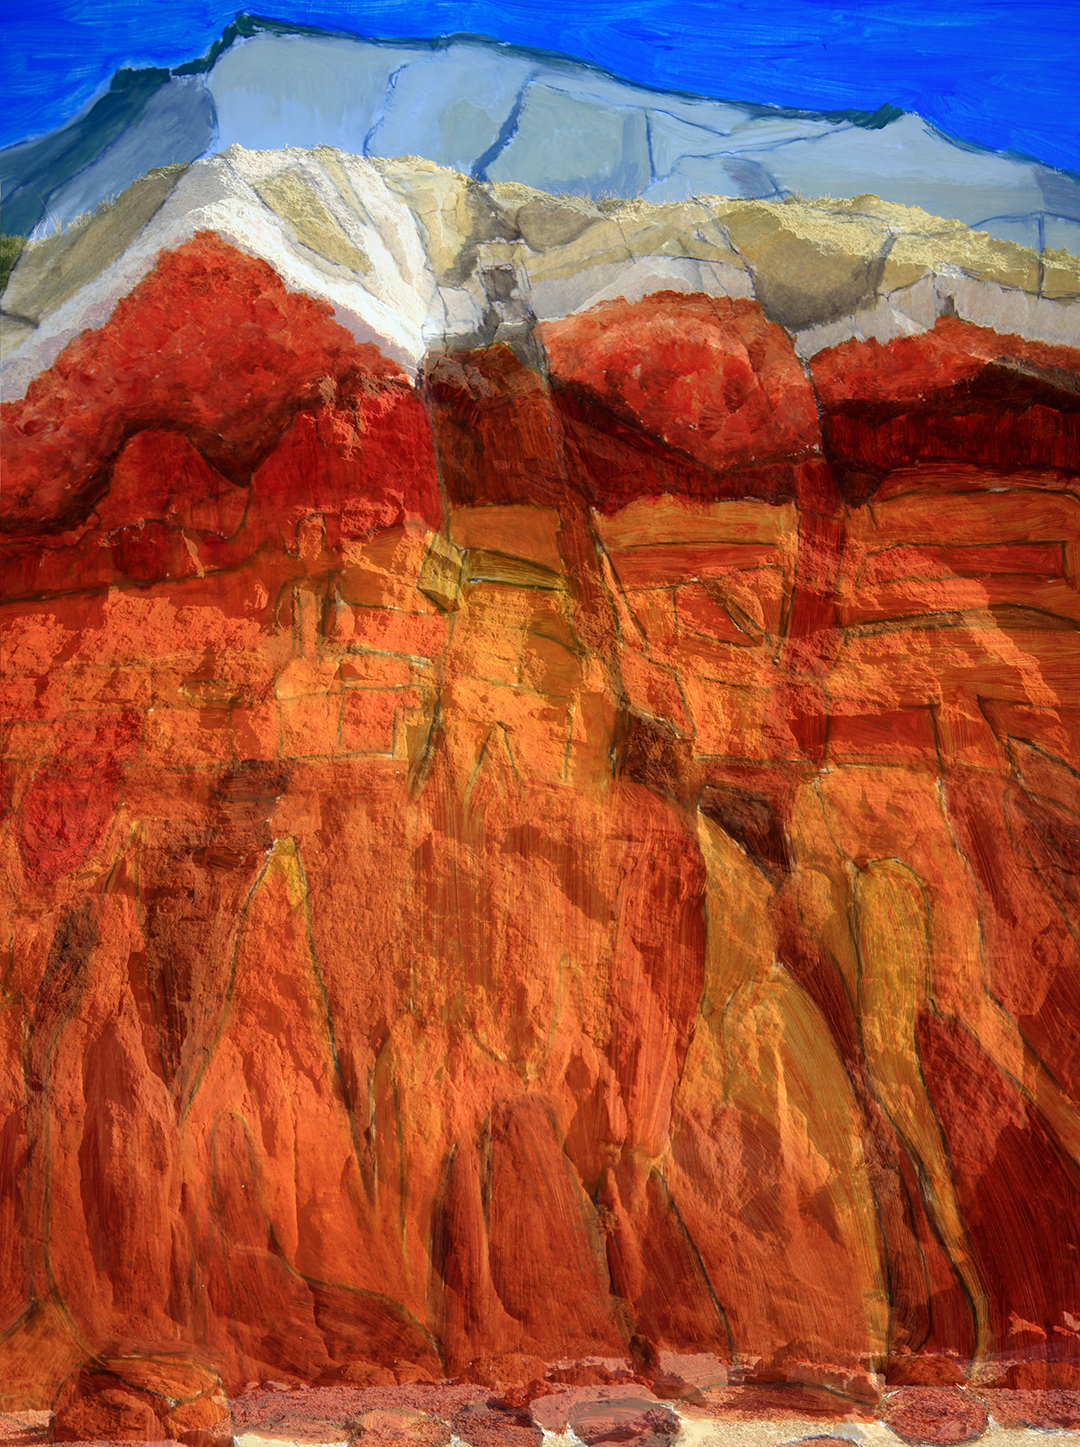 Fractured Cliff, 2022. Digital compilation of oil sketch and multiple images, giclee print, 119x84cm.